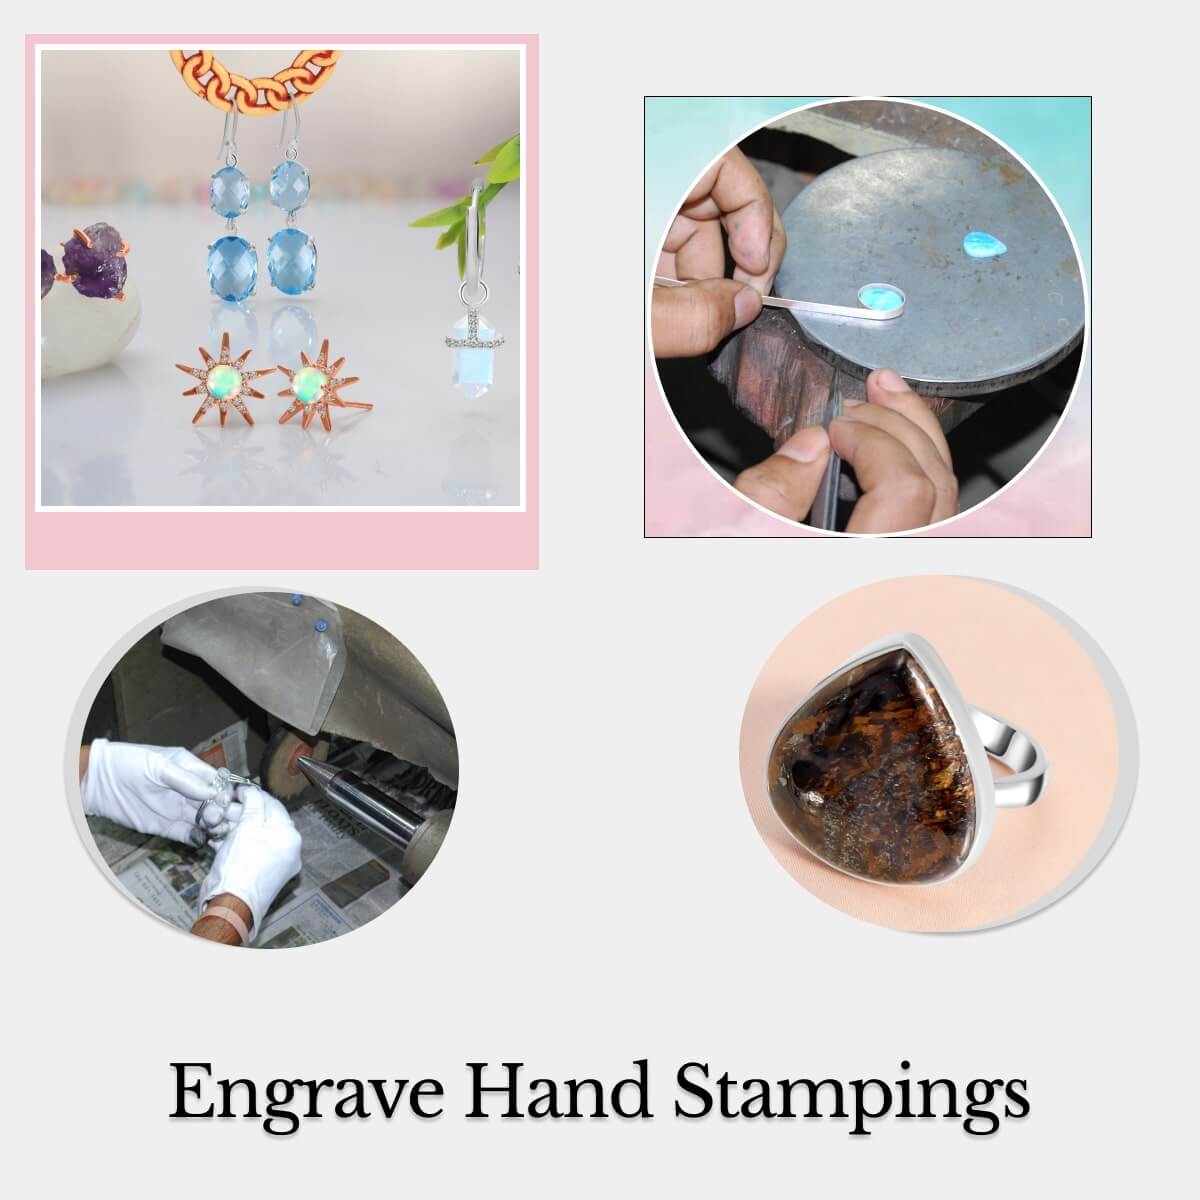 Engraving the hand stamps styles